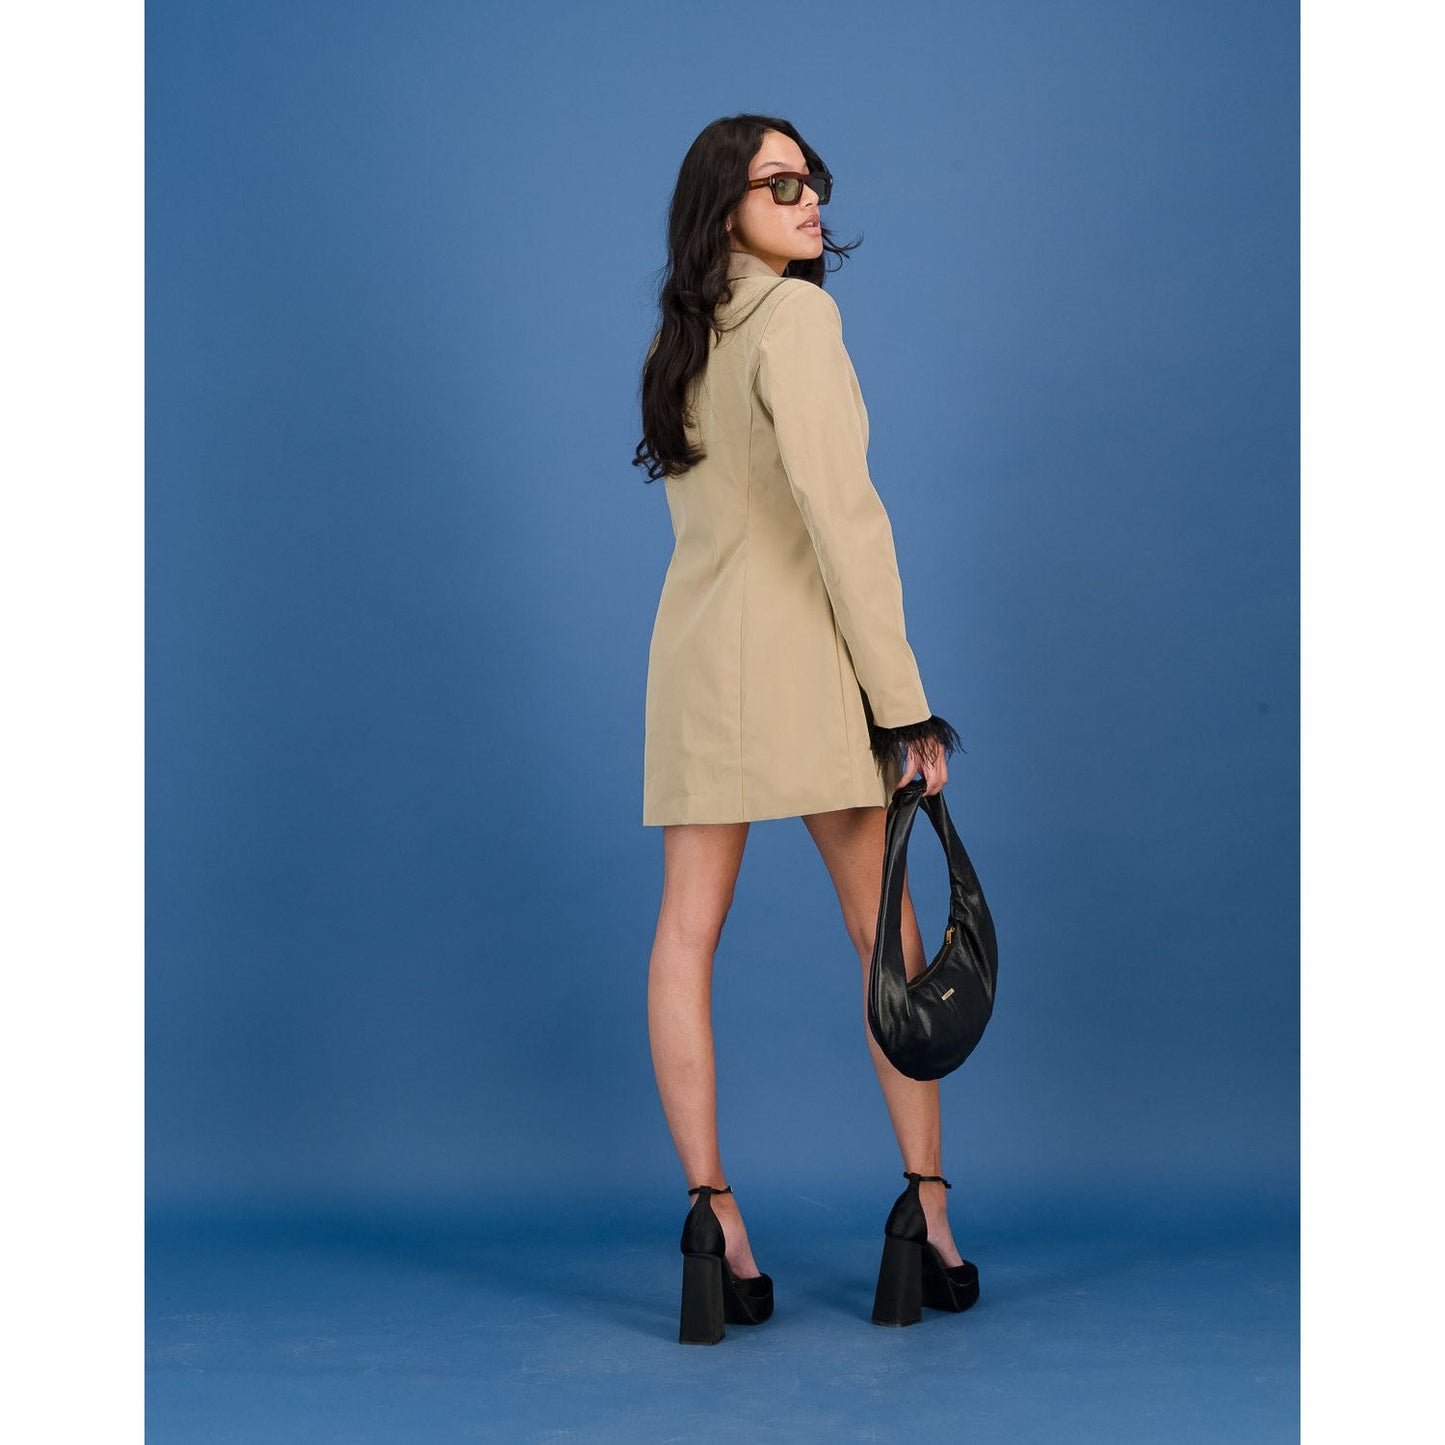 Blazer Dress in Camel with Black Feather Detail